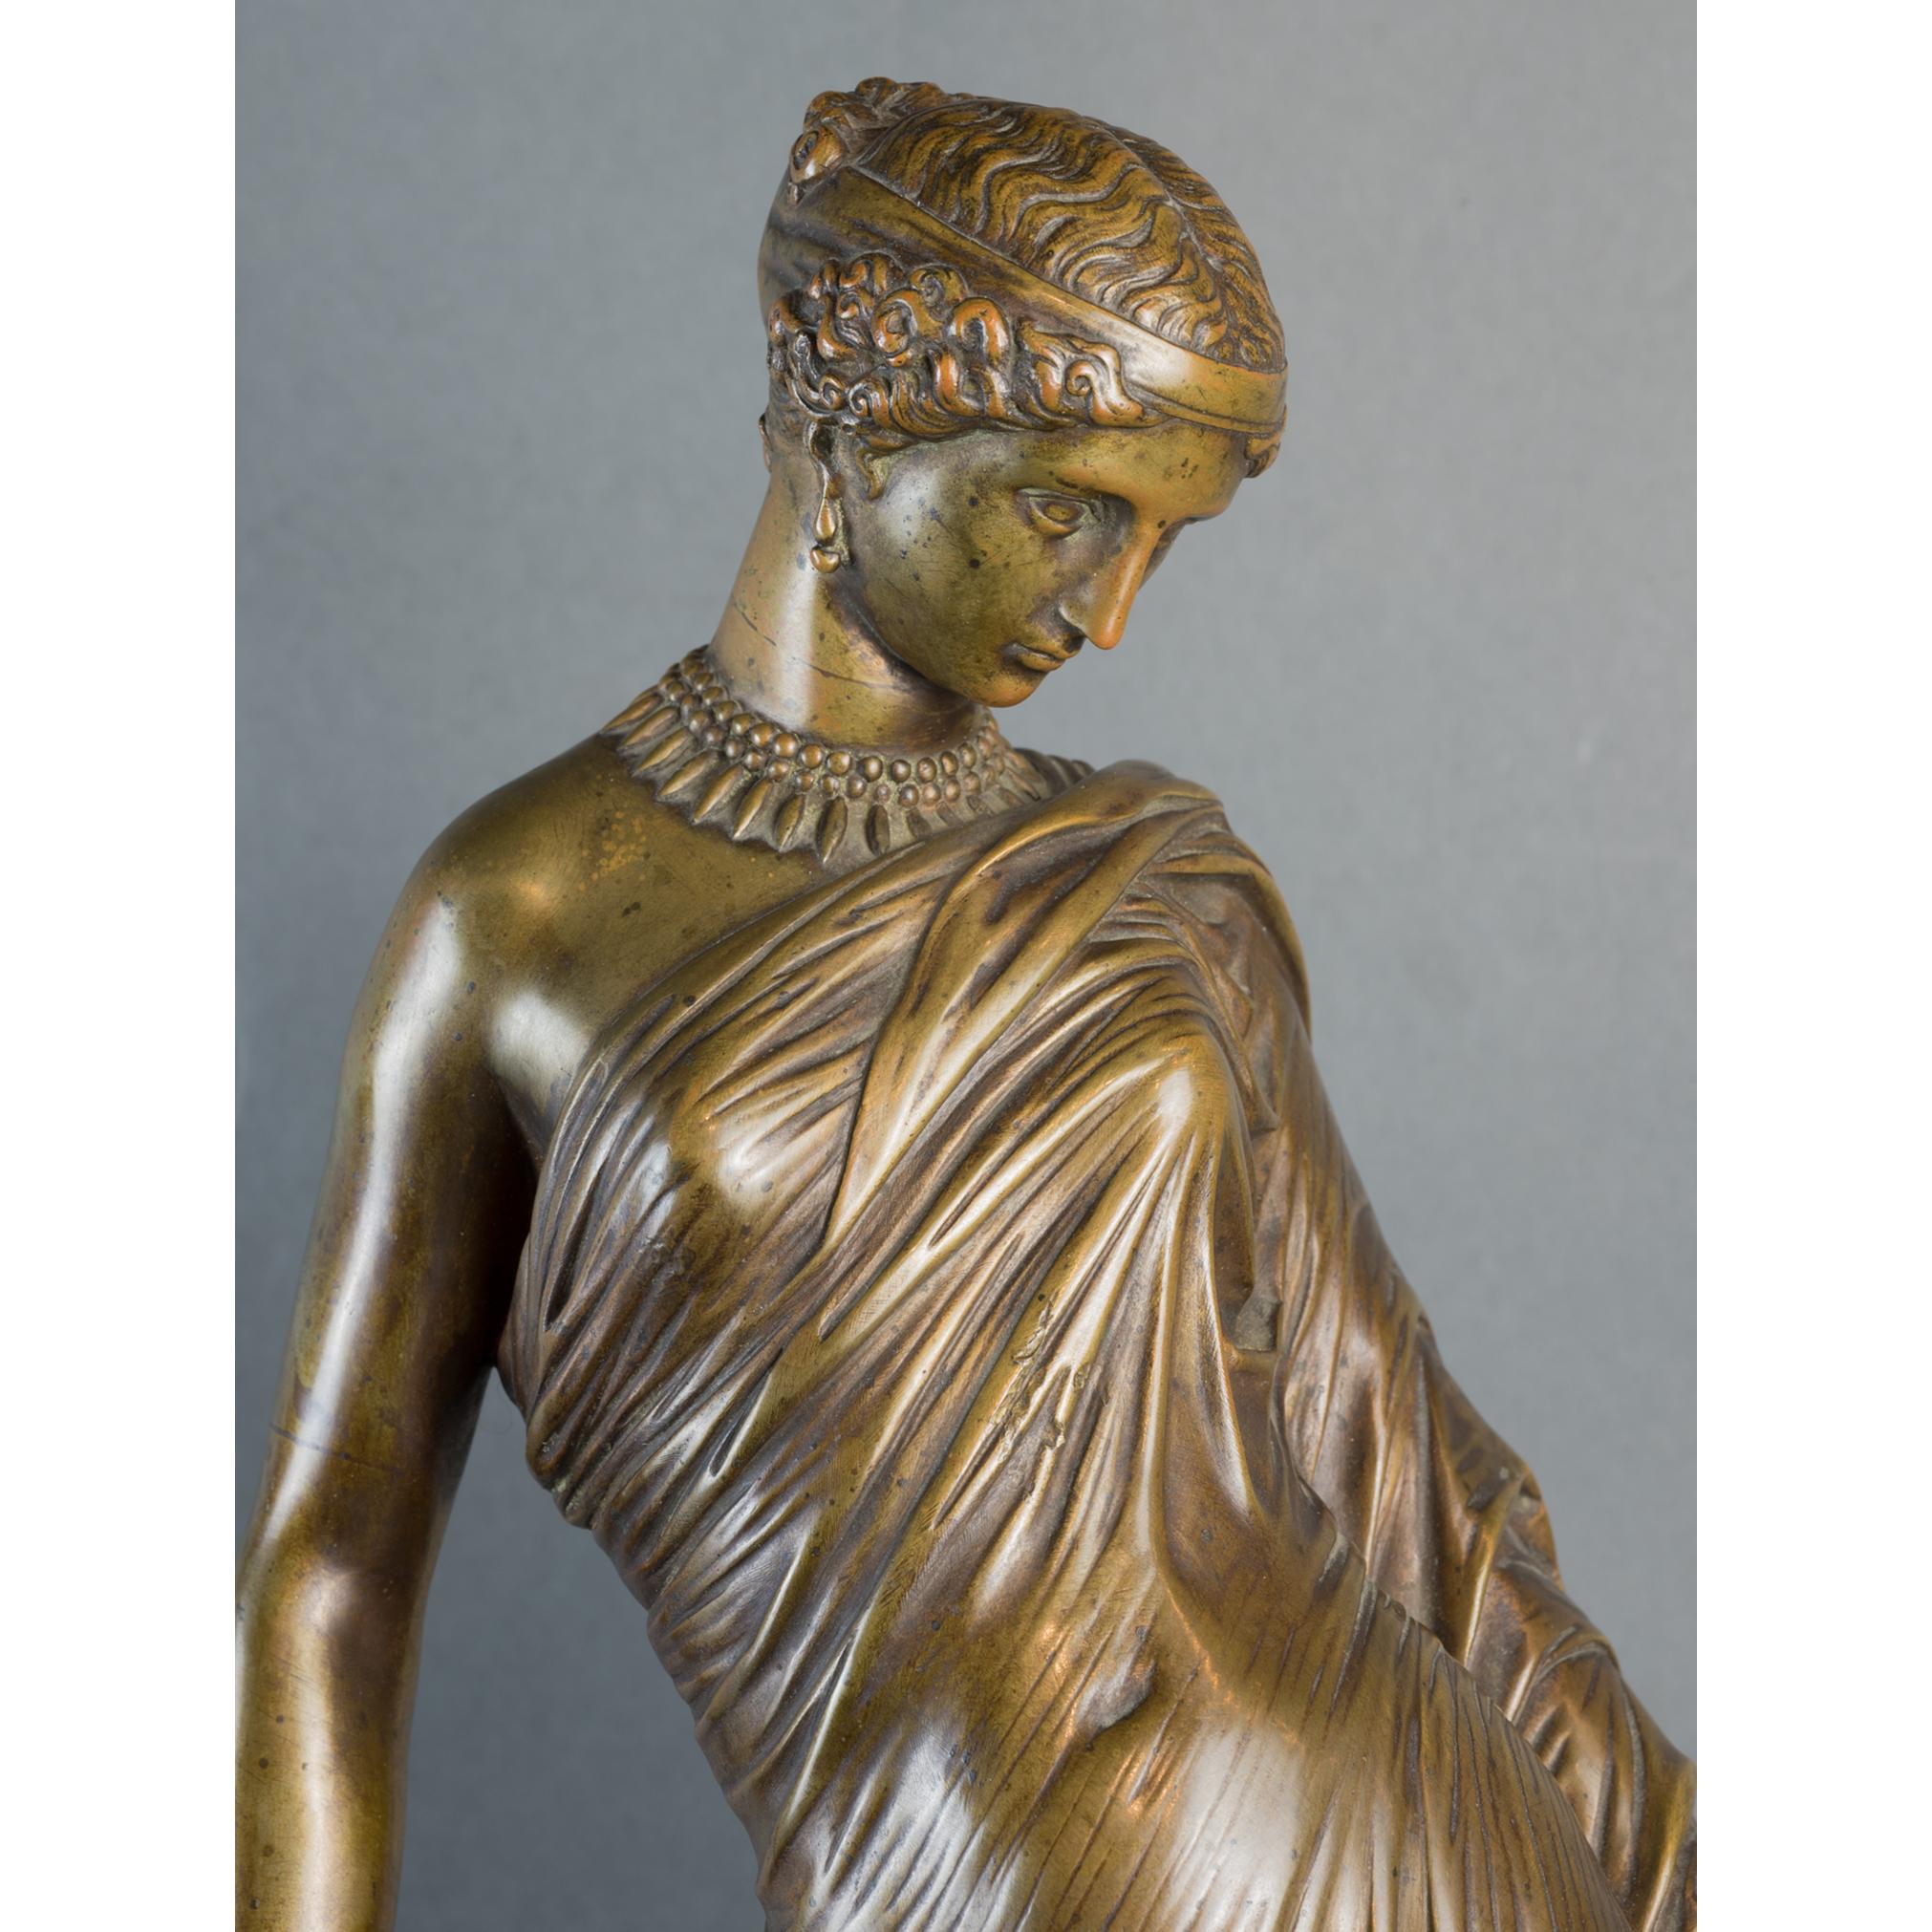 A beautiful female figural bronze statue of a lady wearing grecian style dress with thong sandals and an ornate necklace. She holds a Lyre which is carved in the pattern of a turtle shell. She leans on an ionic column that contains the signature,